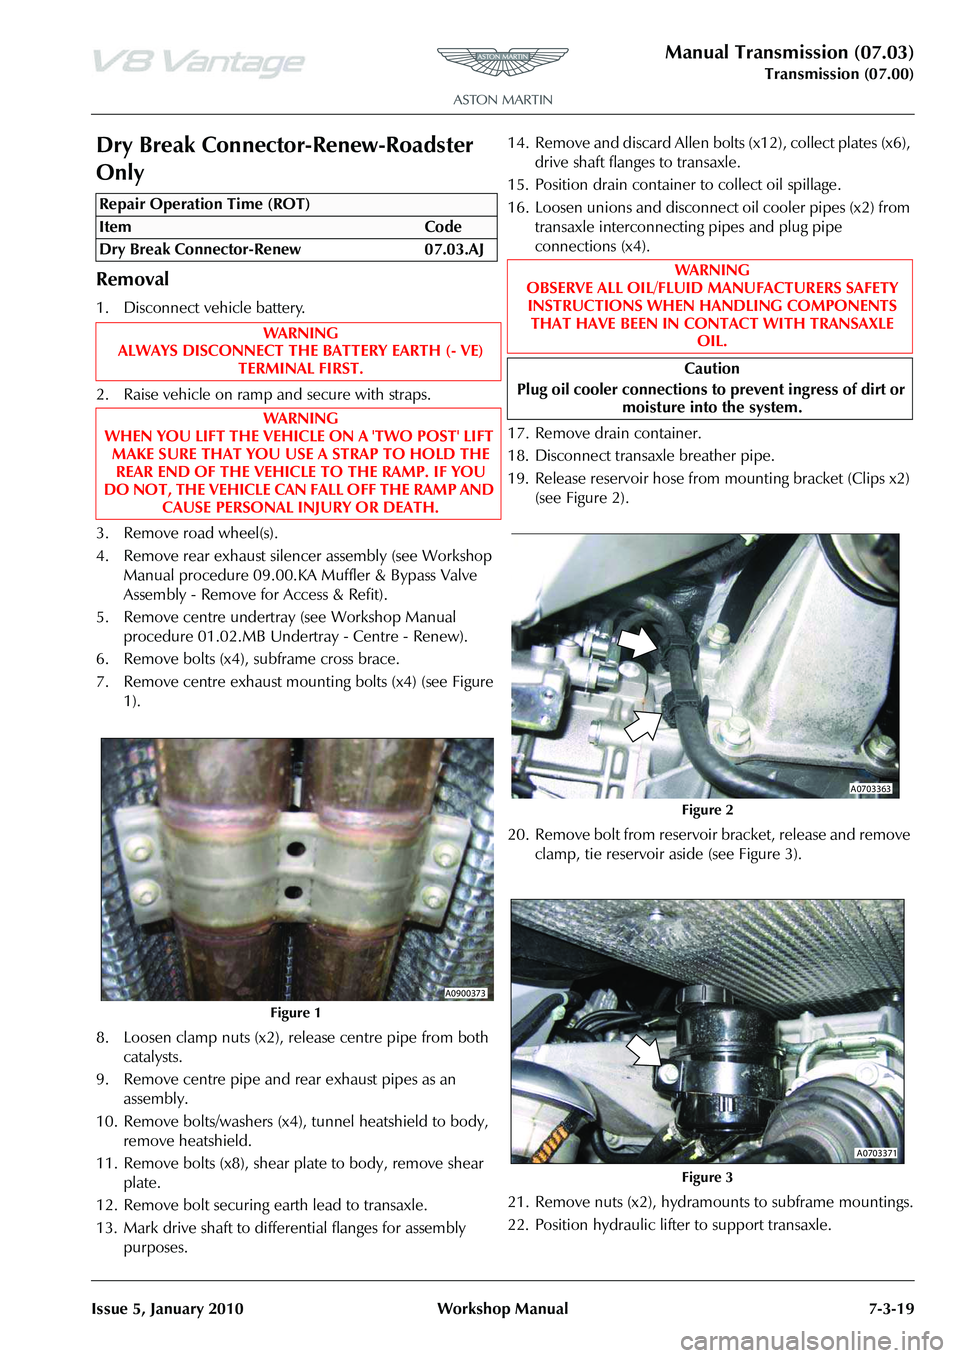 ASTON MARTIN V8 VANTAGE 2010  Workshop Manual Manual Transmission (07.03)
Transmission (07.00)
Issue 5, January 2010 Workshop Manual 7-3-19
Dry Break Connector-Renew-Roadster 
Only
Removal
1. Disconnect vehicle battery.
2. Raise vehicle on ramp a